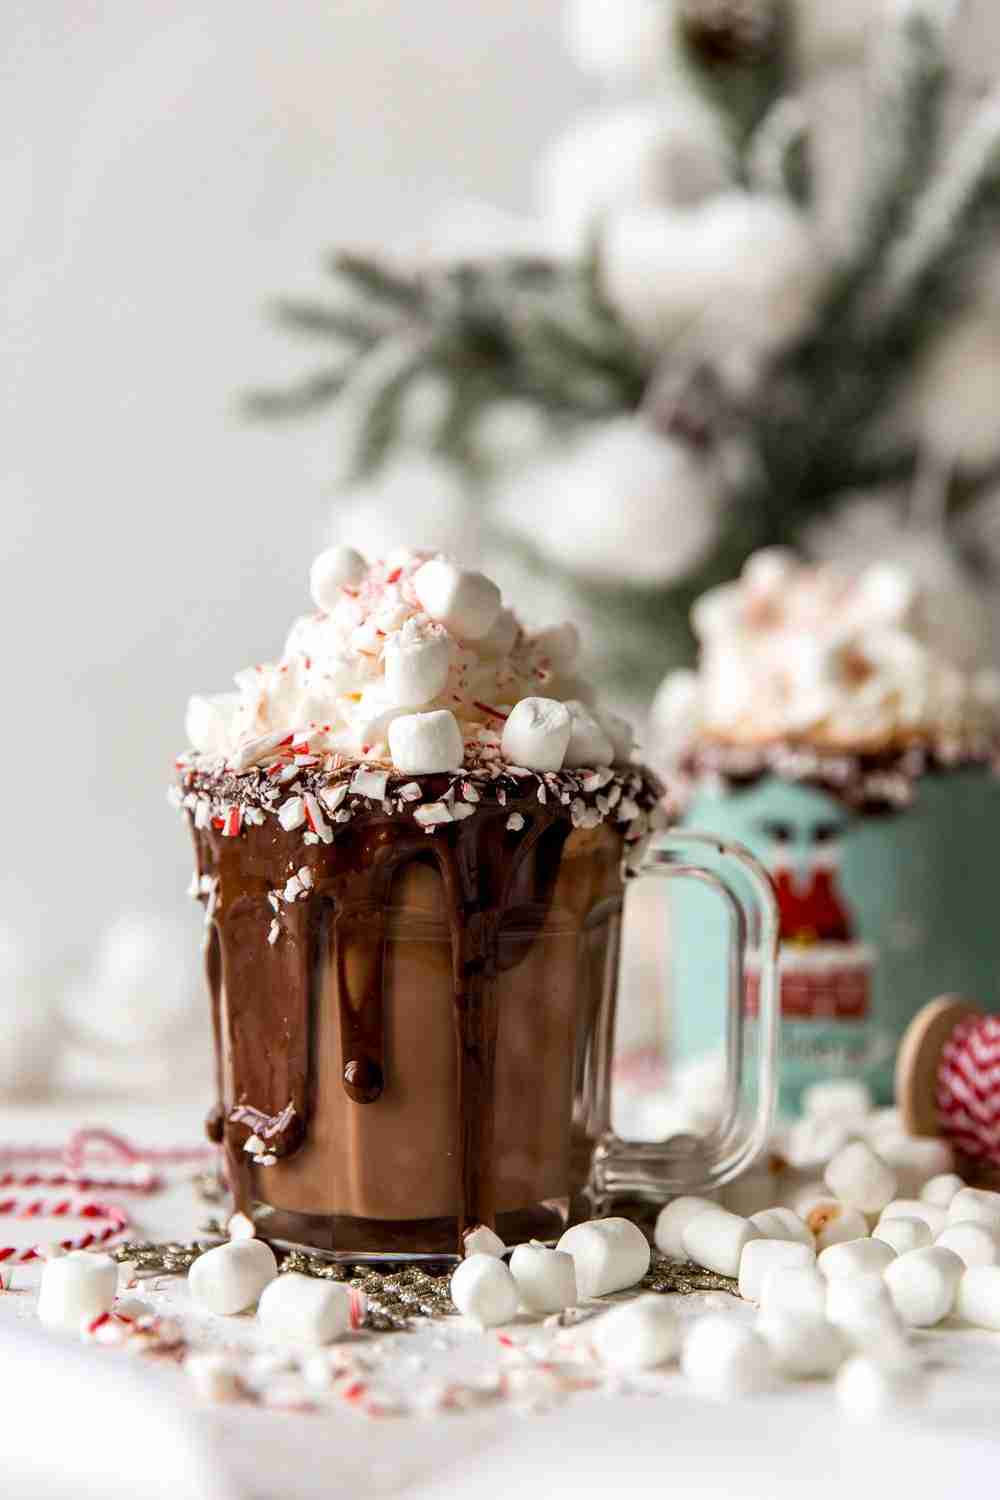 A cup of hot chocolate with marshmallows and candy canes - Chocolate